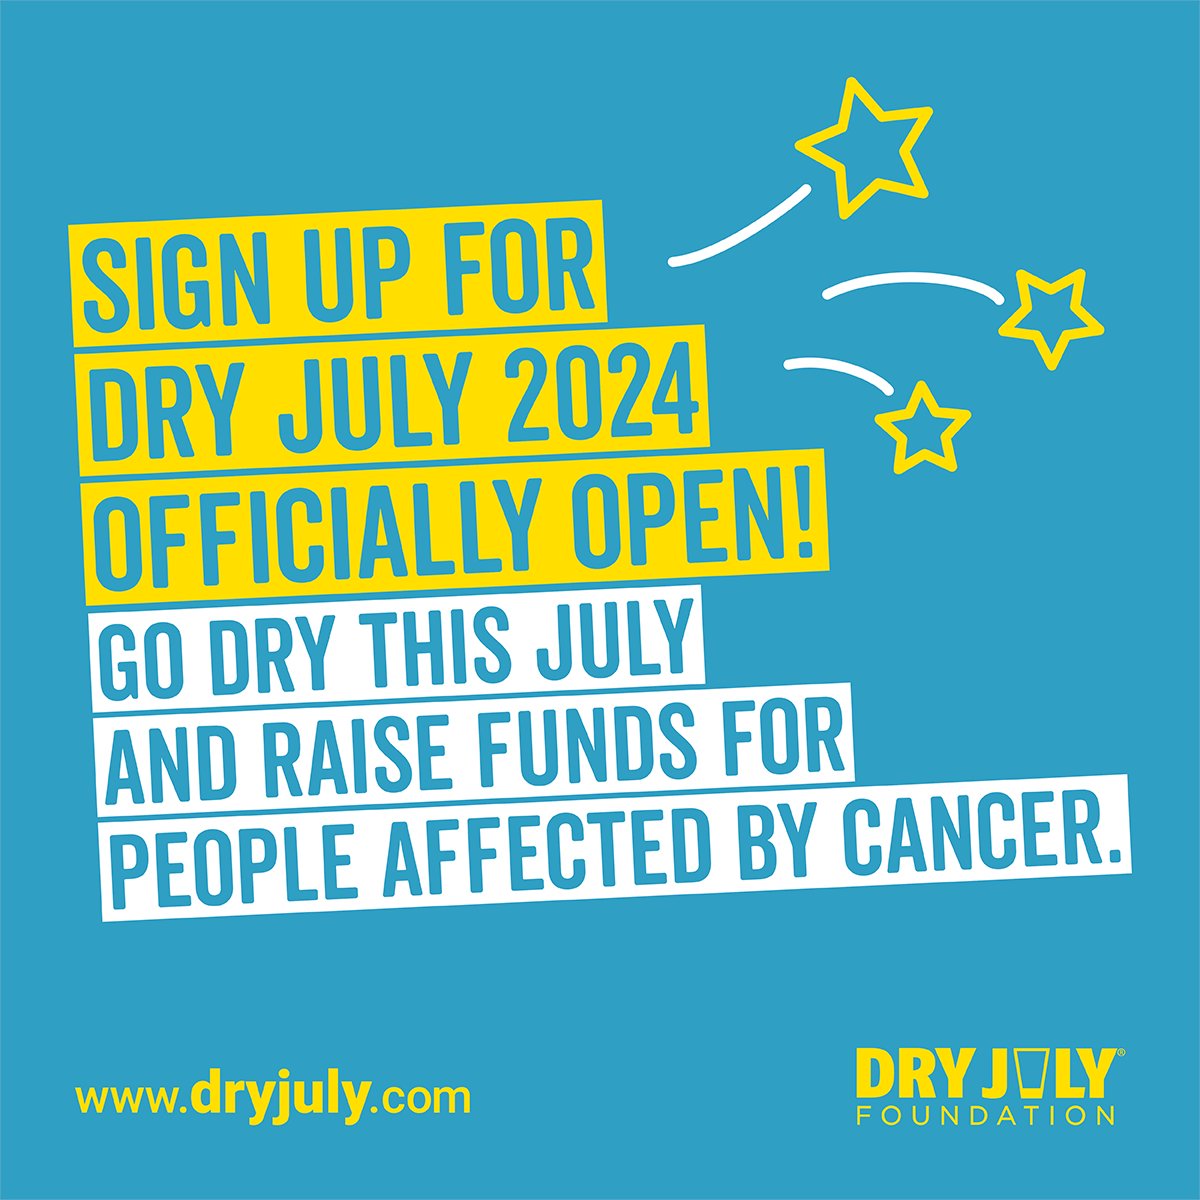 When you go Dry this July, you can choose Rare Cancers Australia as the beneficiary of your donations! It’s free to register, with so many benefits for your health. Sign up at: bit.ly/4aXk26L